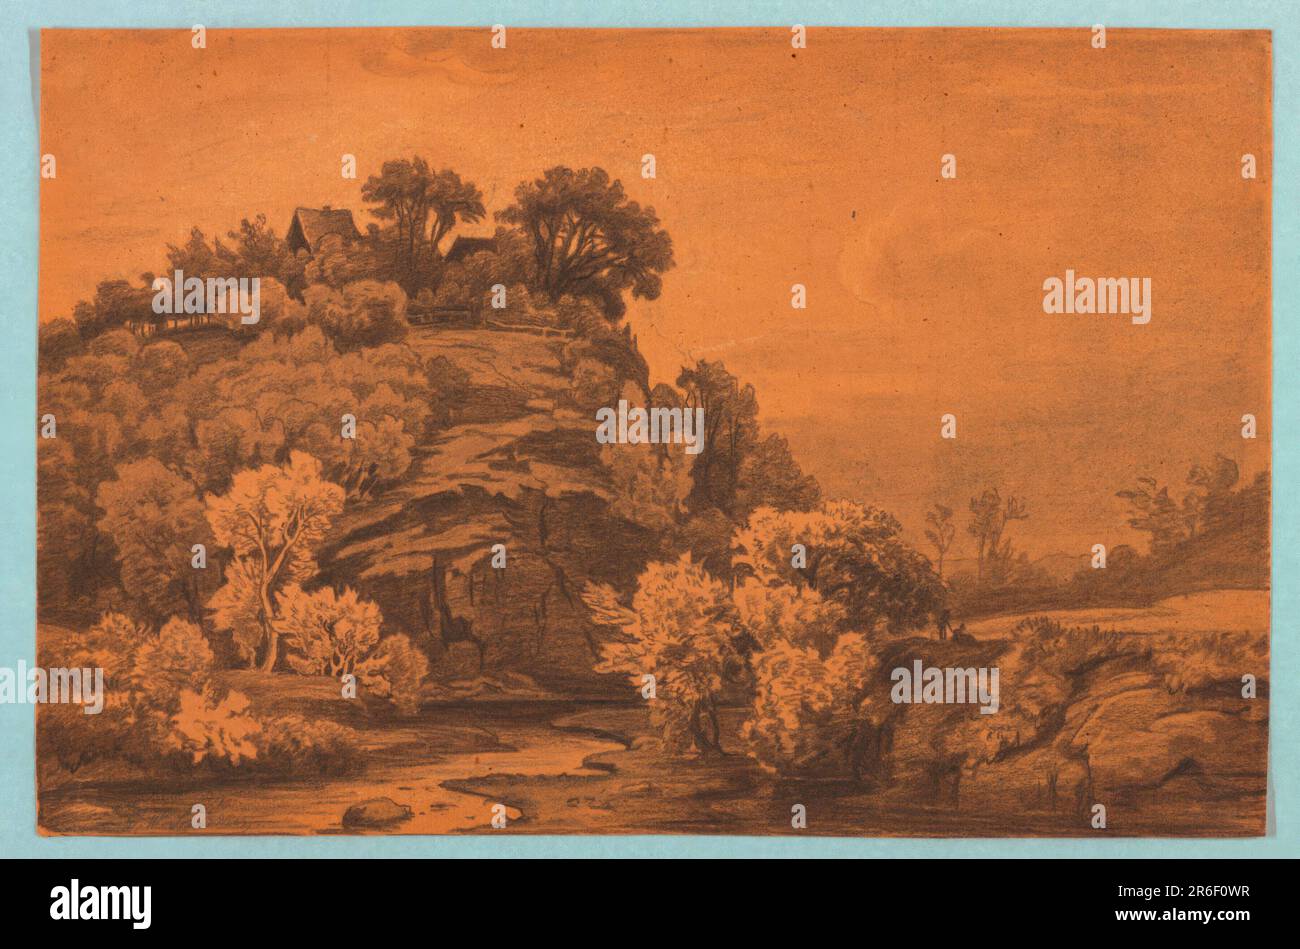 Landscape with Houses on a Wide Bluff. Black chald and white heightening on brown paper. Date: ca. 1840-1860. Museum: Cooper Hewitt, Smithsonian Design Museum. Stock Photo